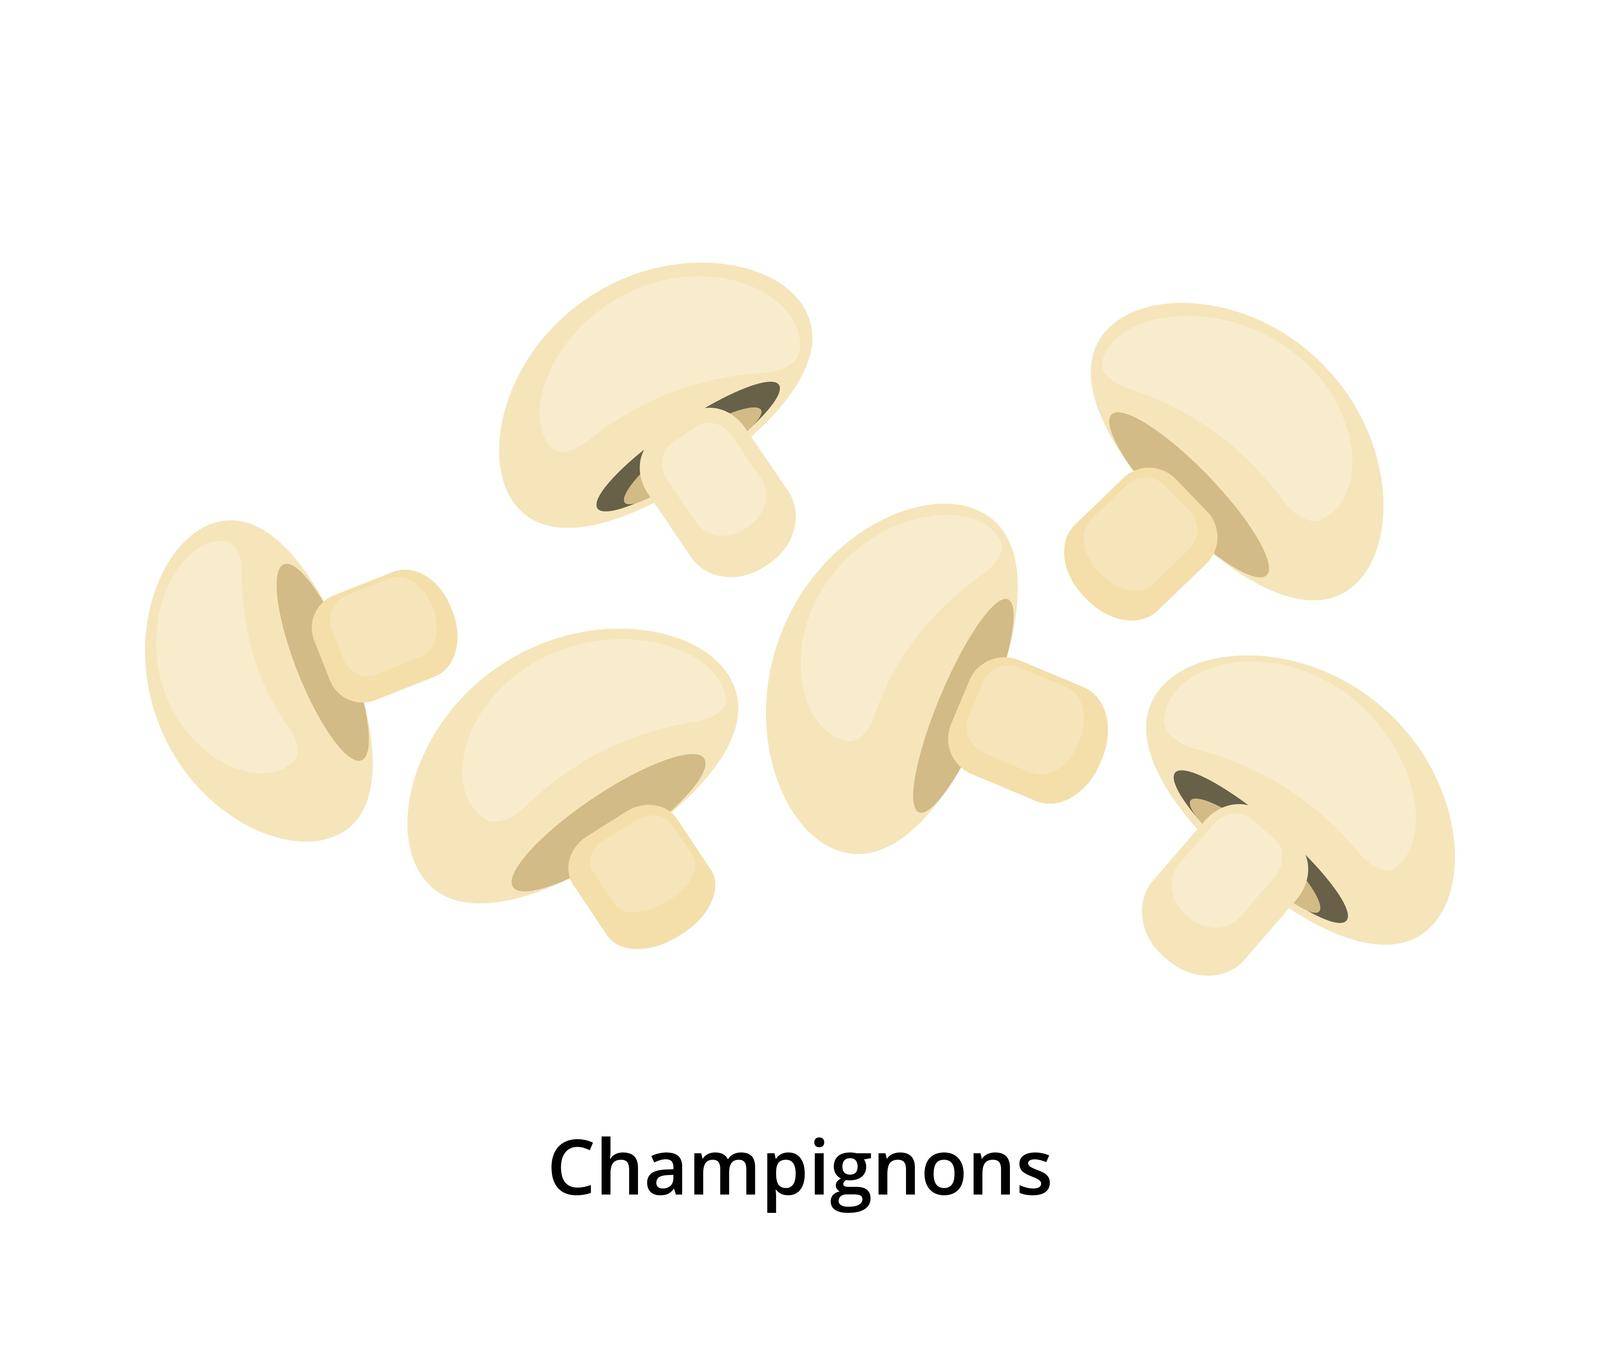 Group of cartoon mushrooms champignons isolated on white background.